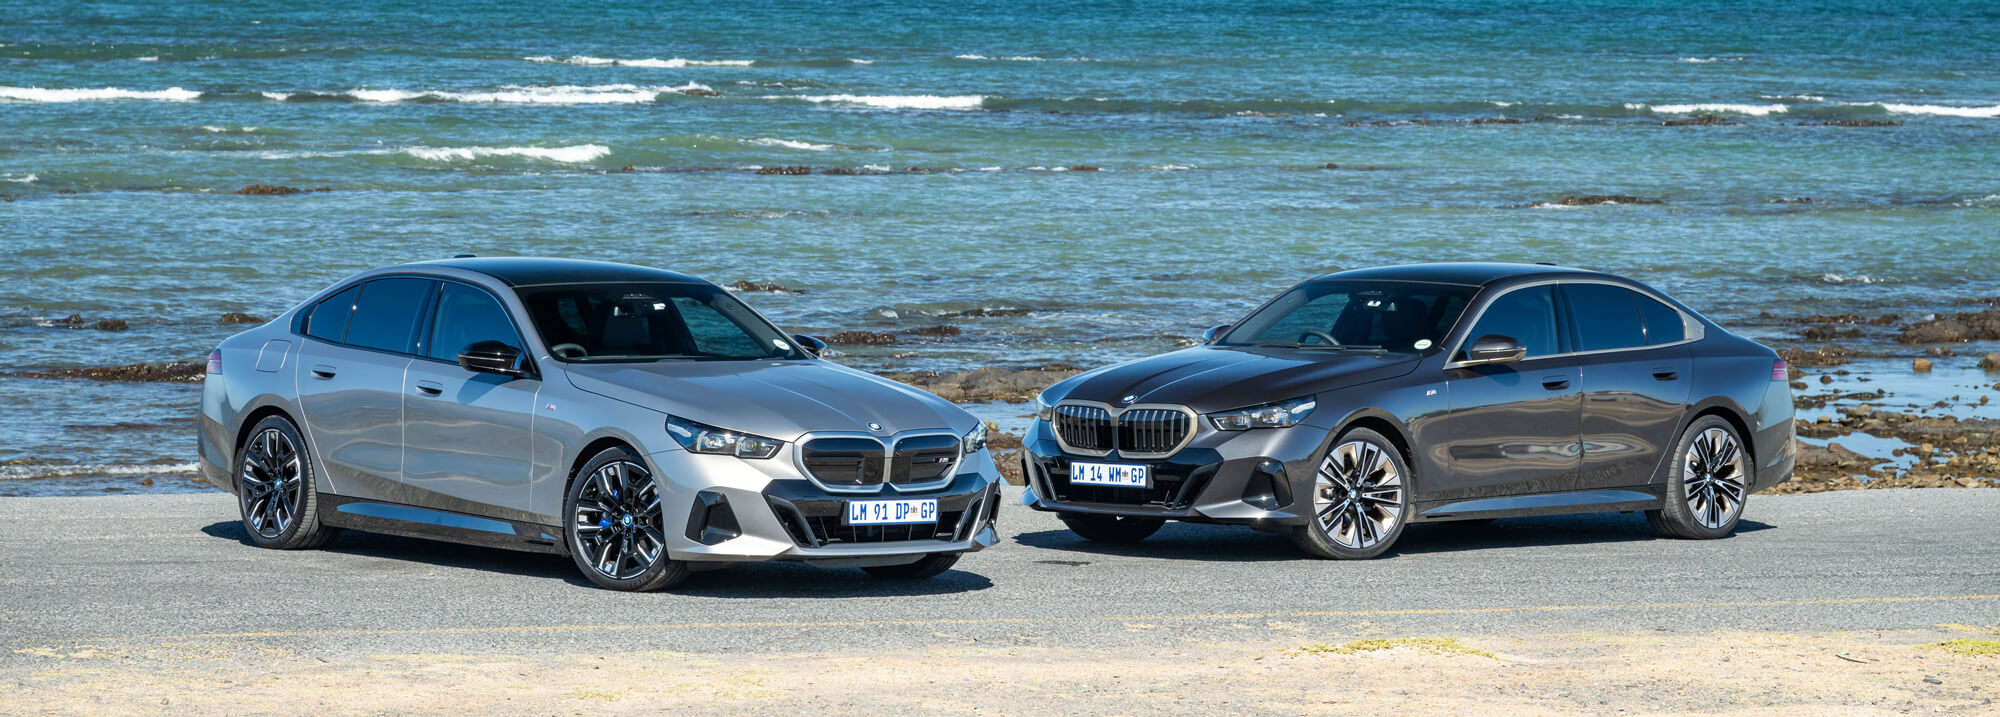 BMW 5 Series launches in South Africa video-banner